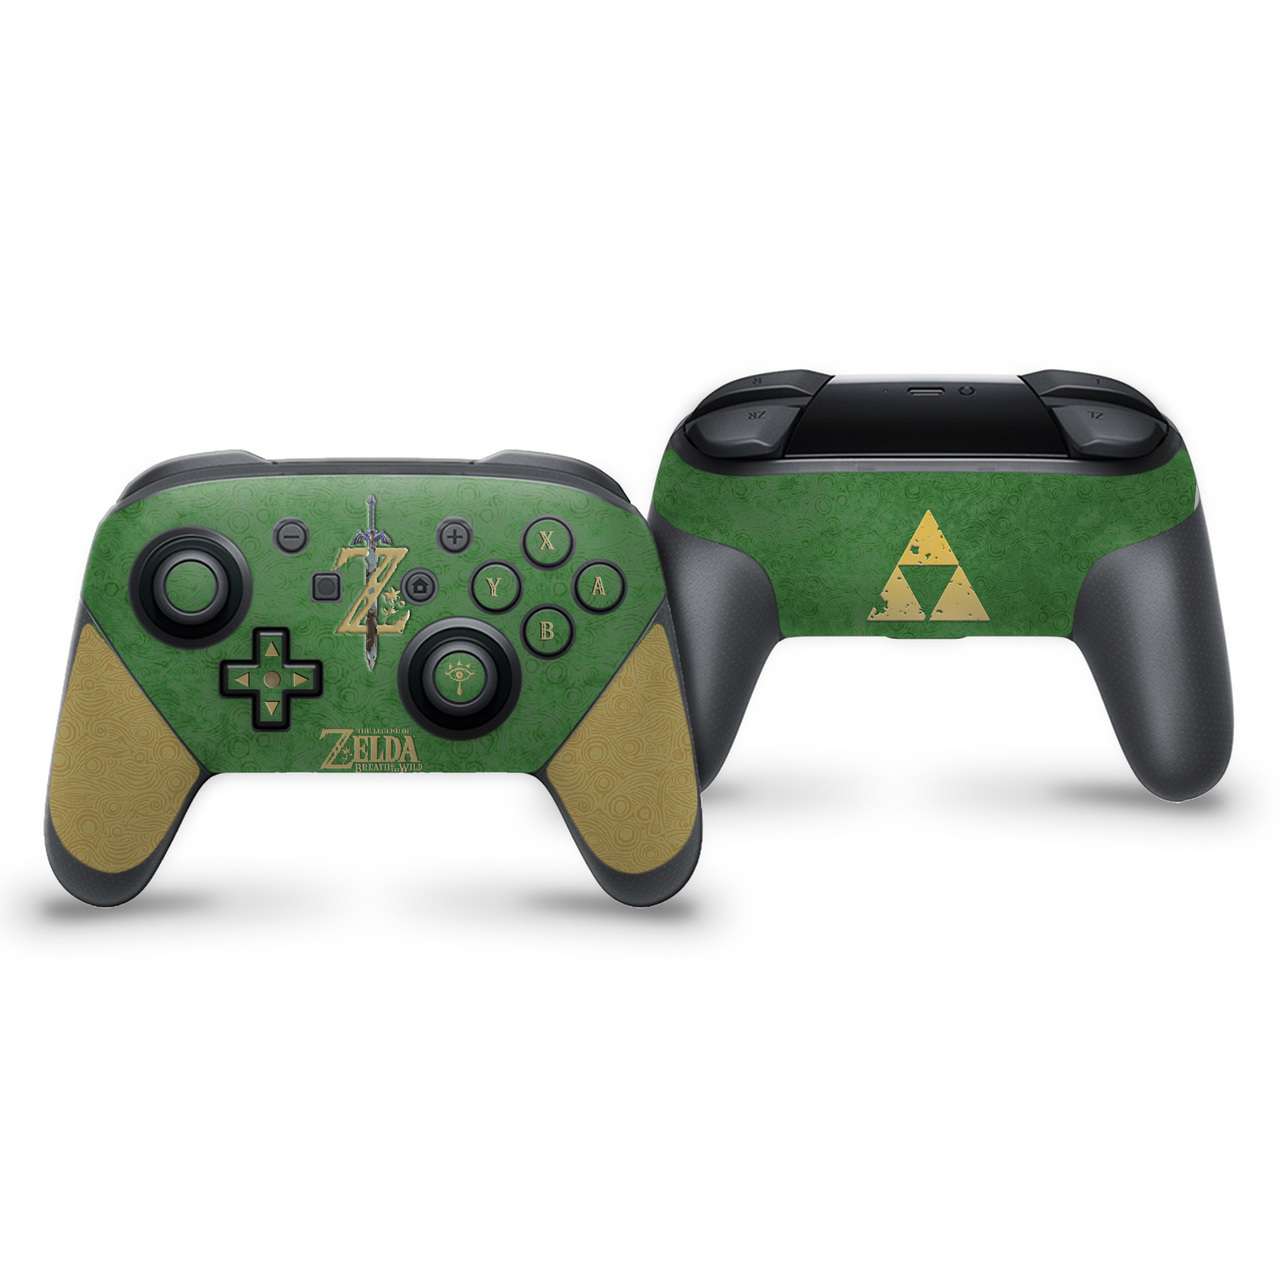 New The Legend Of Zelda Switch Controller Sports One Of Link's Most Iconic  Looks - GameSpot